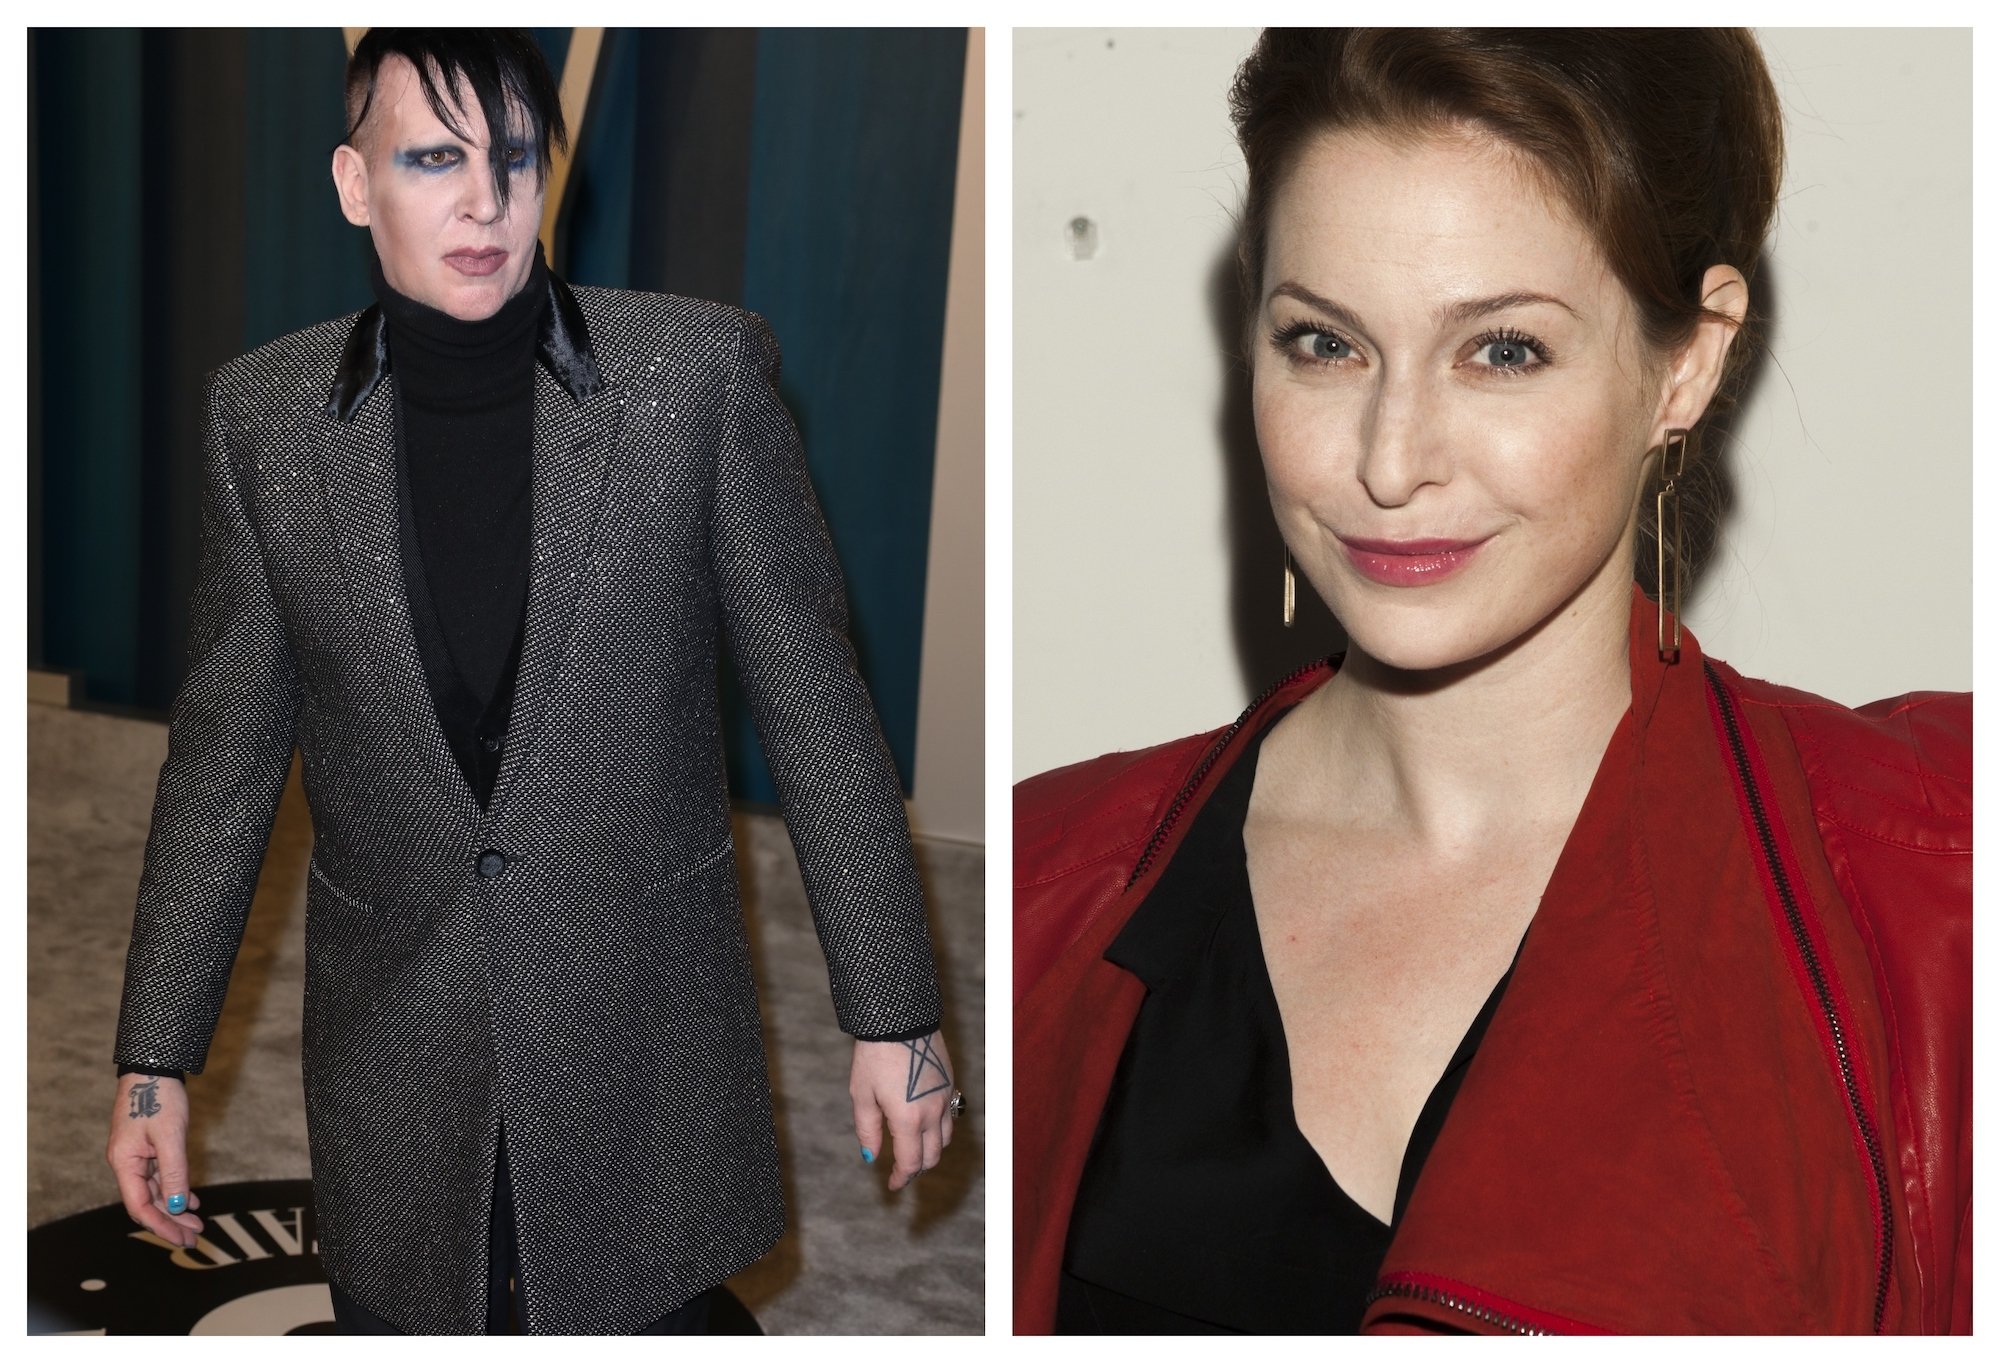 Marilyn Manson Sued for 'Human Trafficking' by Game of Thrones Actress Esmé Bianco